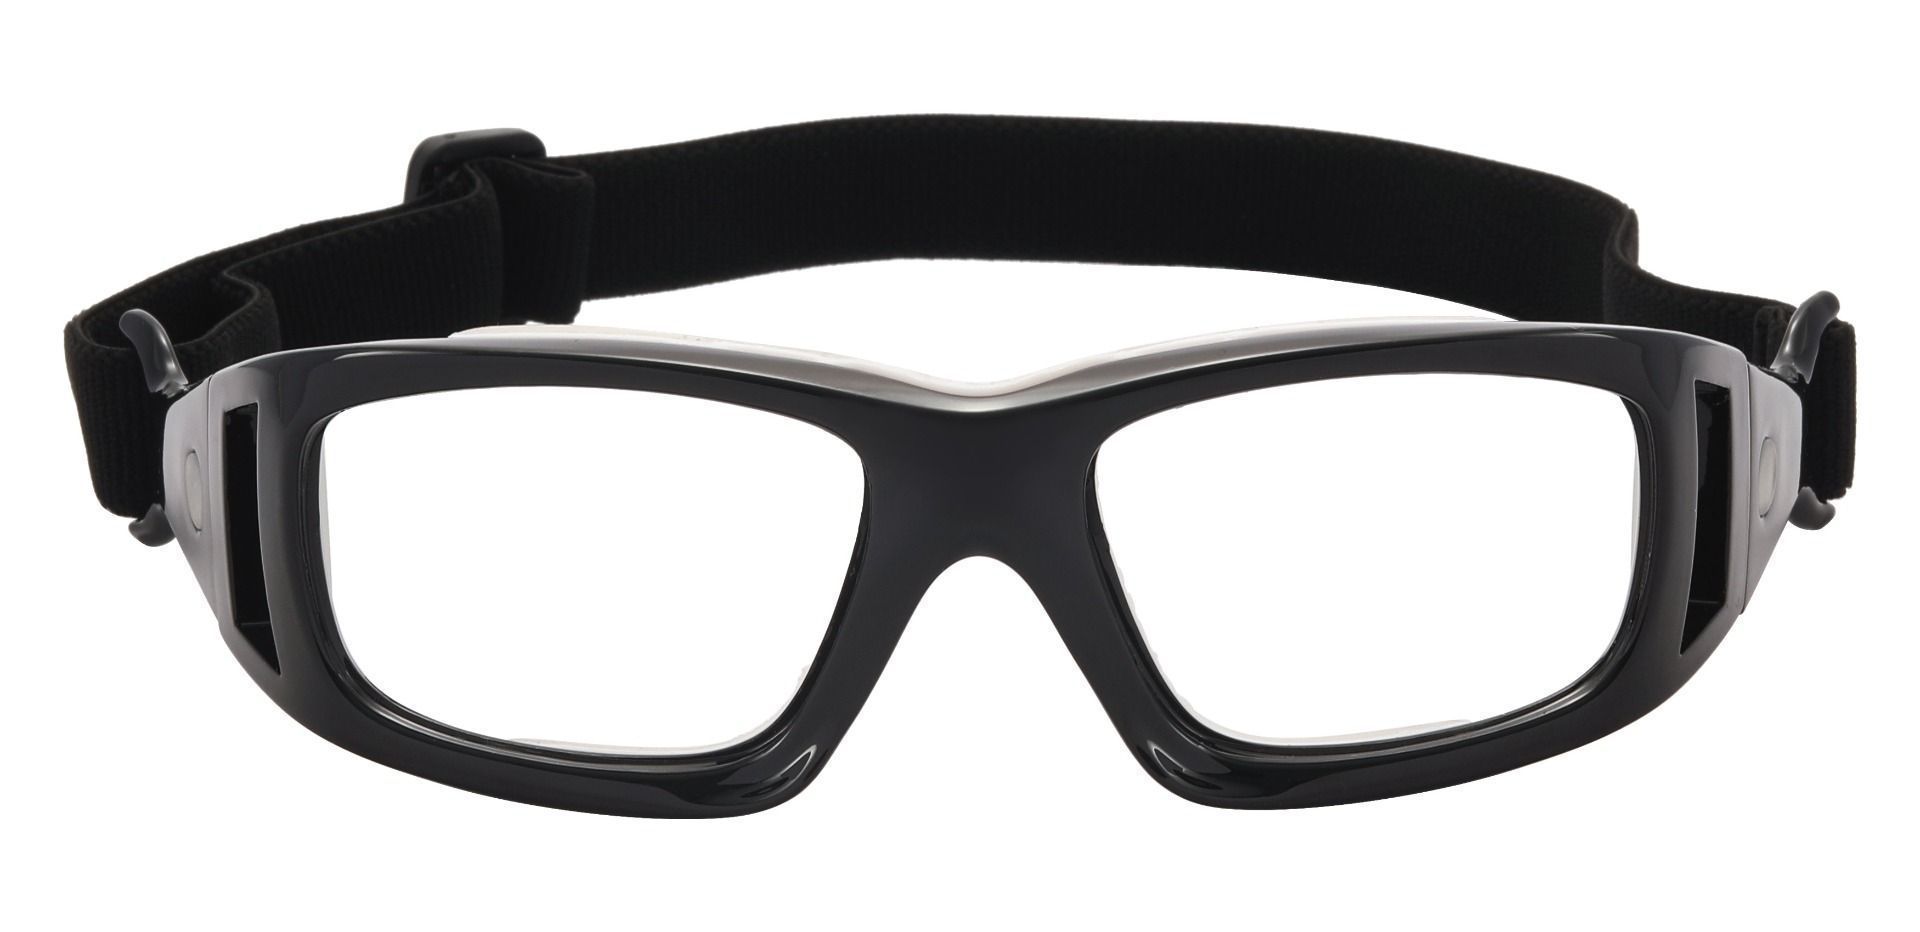 Heller Sports Goggles